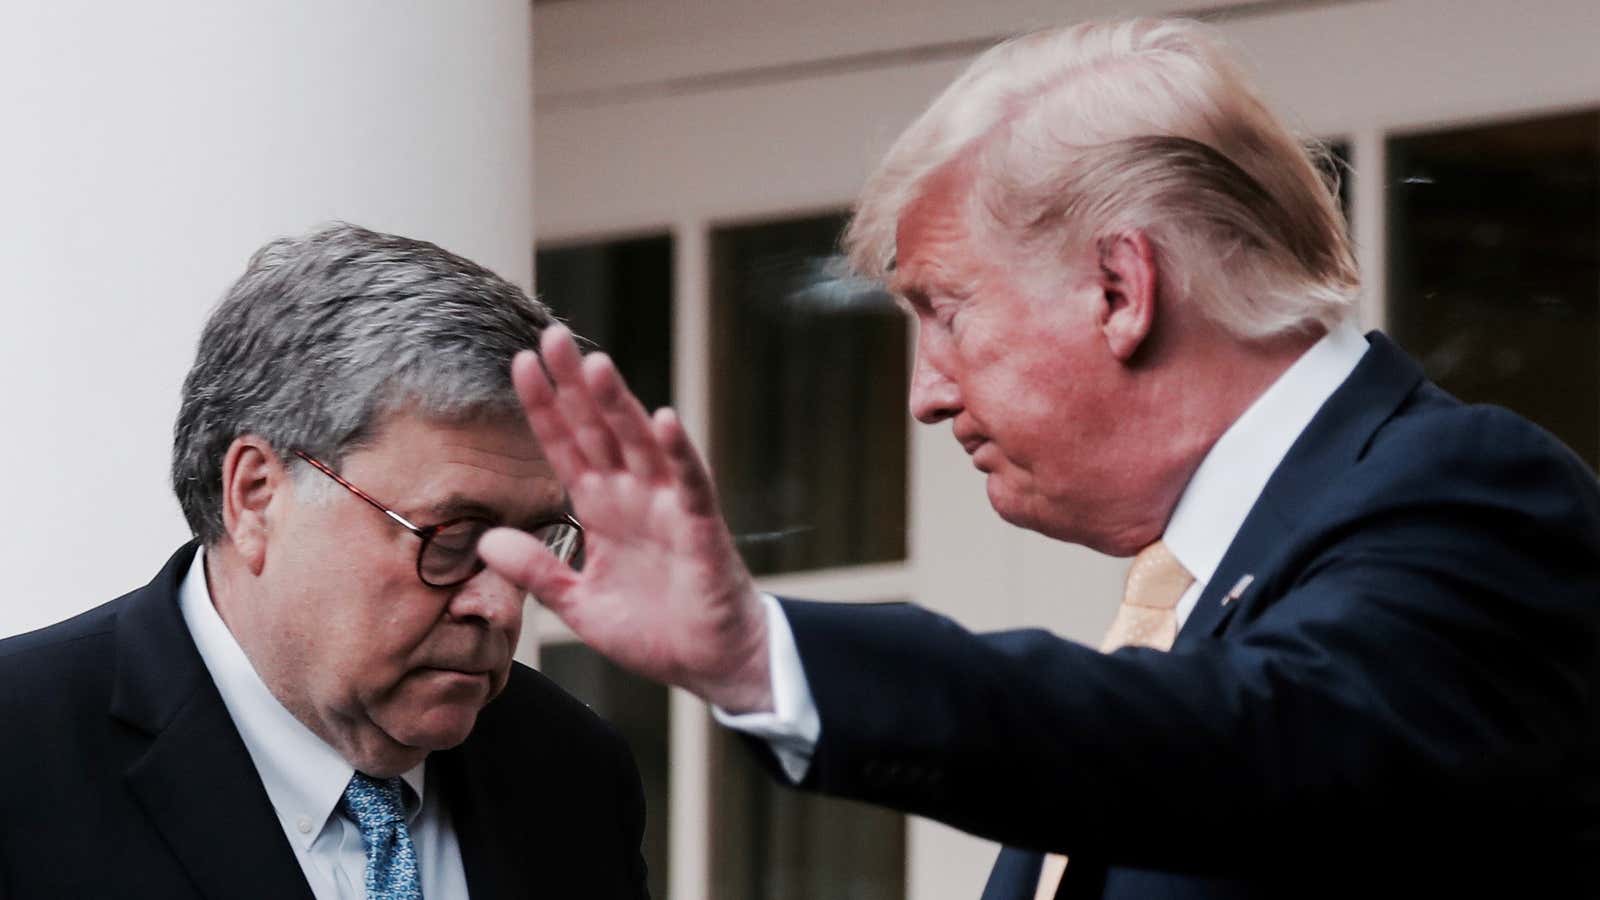 Lowering the Barr.